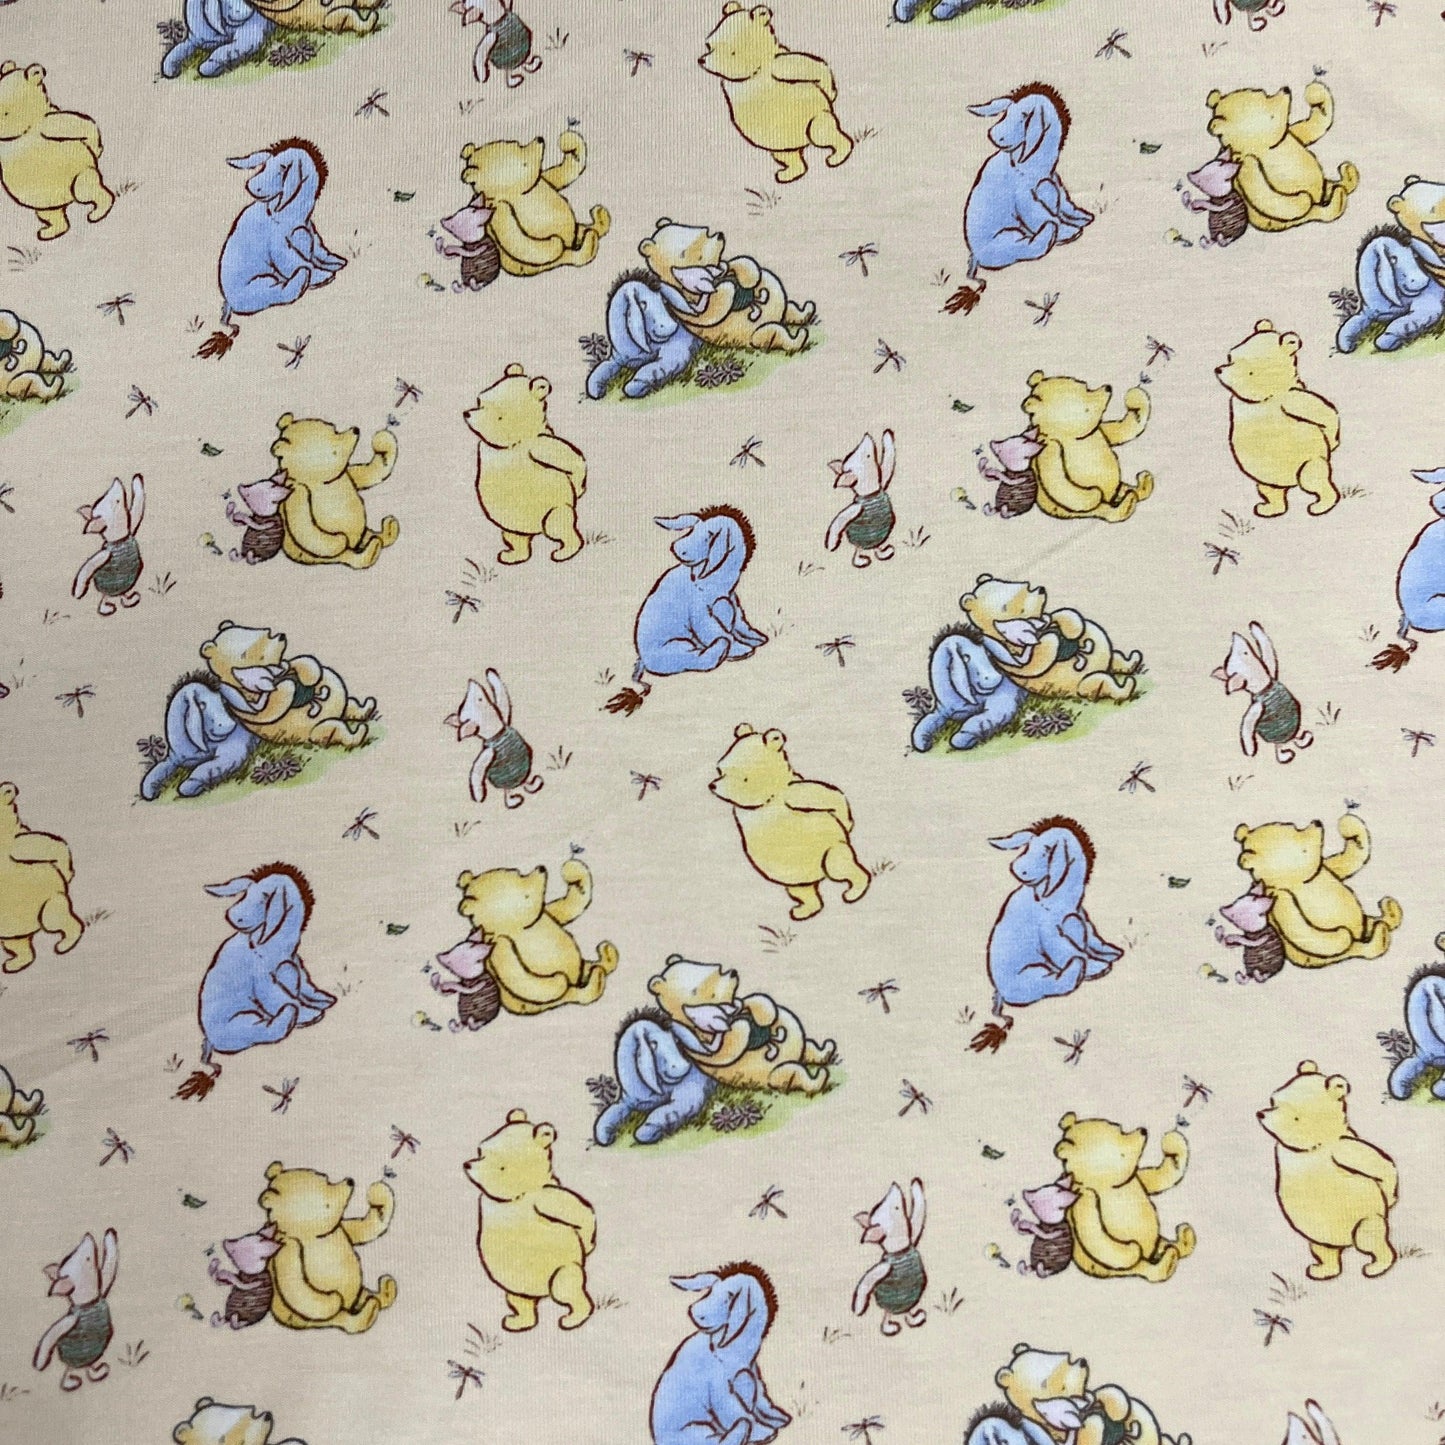 Winnie the Pooh and Friends on Yellow Bamboo/Spandex Jersey Fabric - Nature's Fabrics